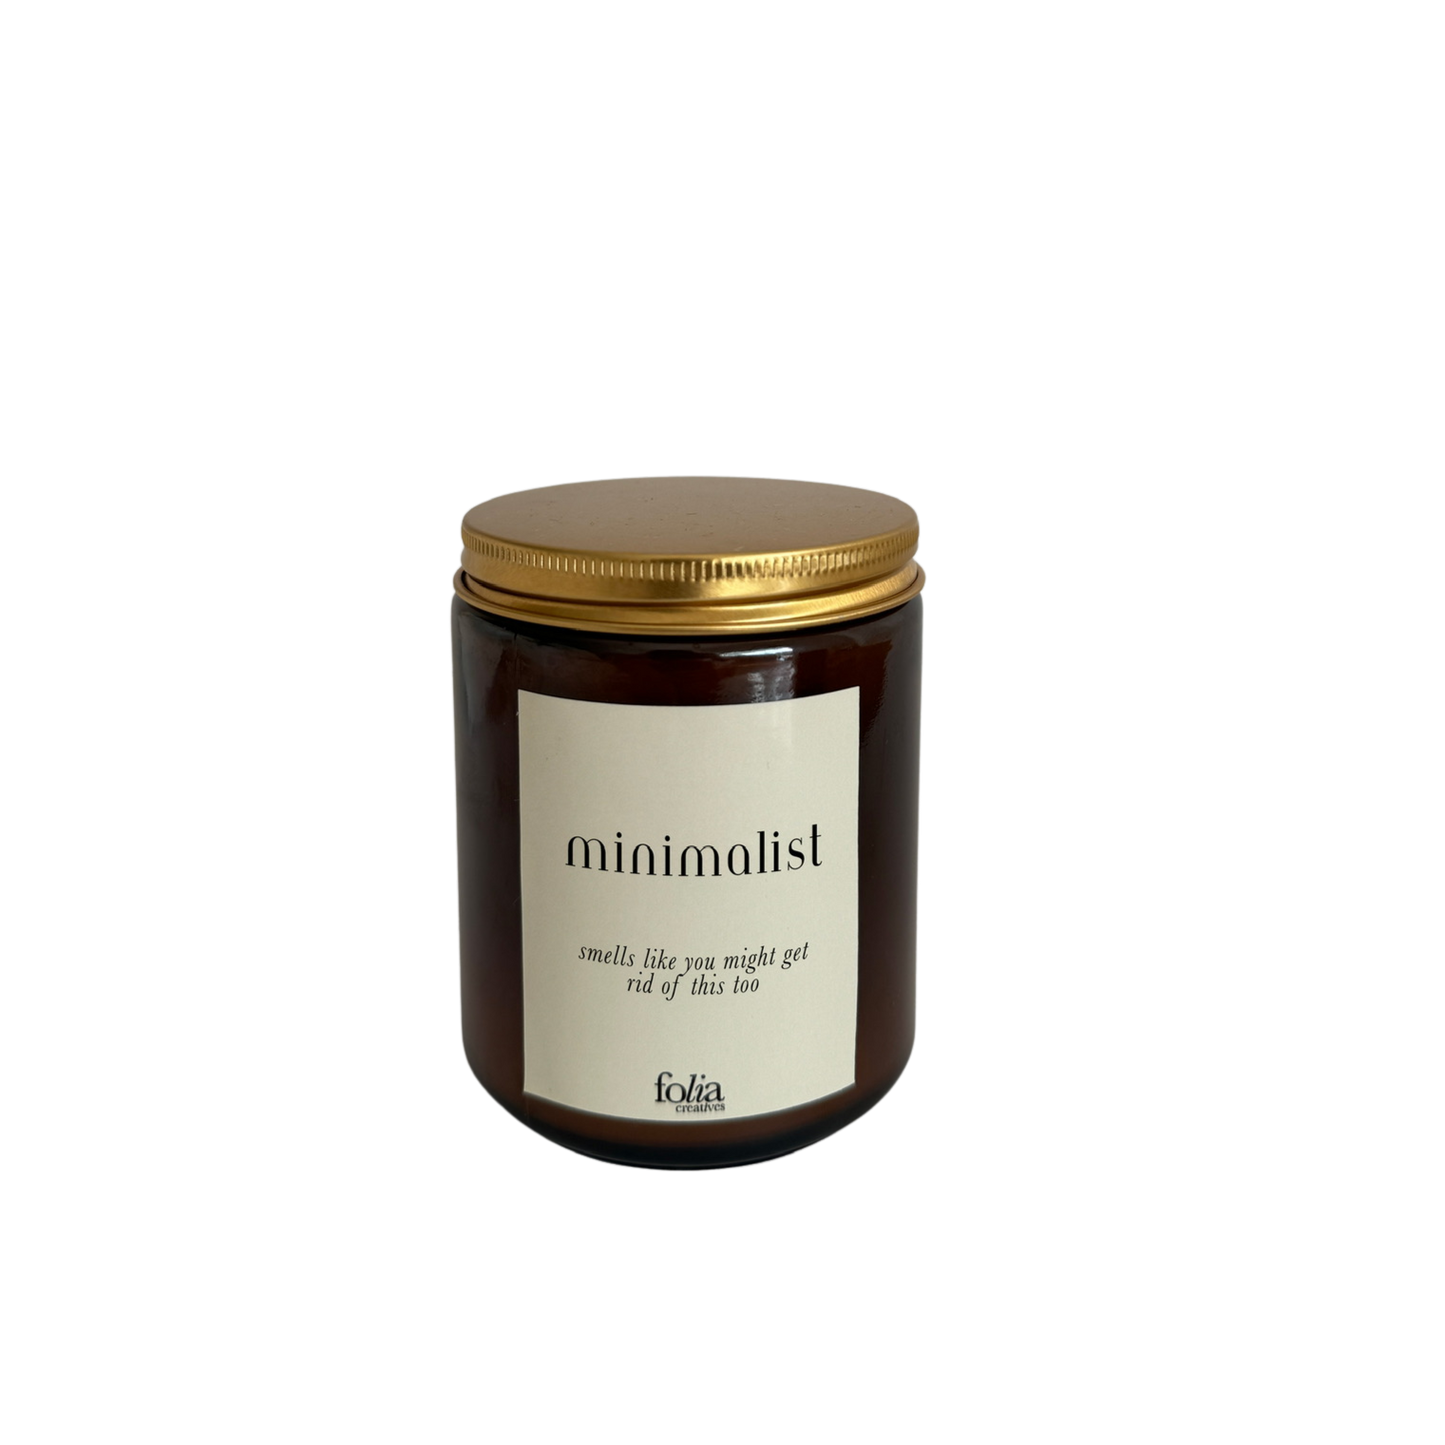 Introducing our "Minimal" candle, the scent of decluttering regrets. Light it up and feel the urge to simplify your life.